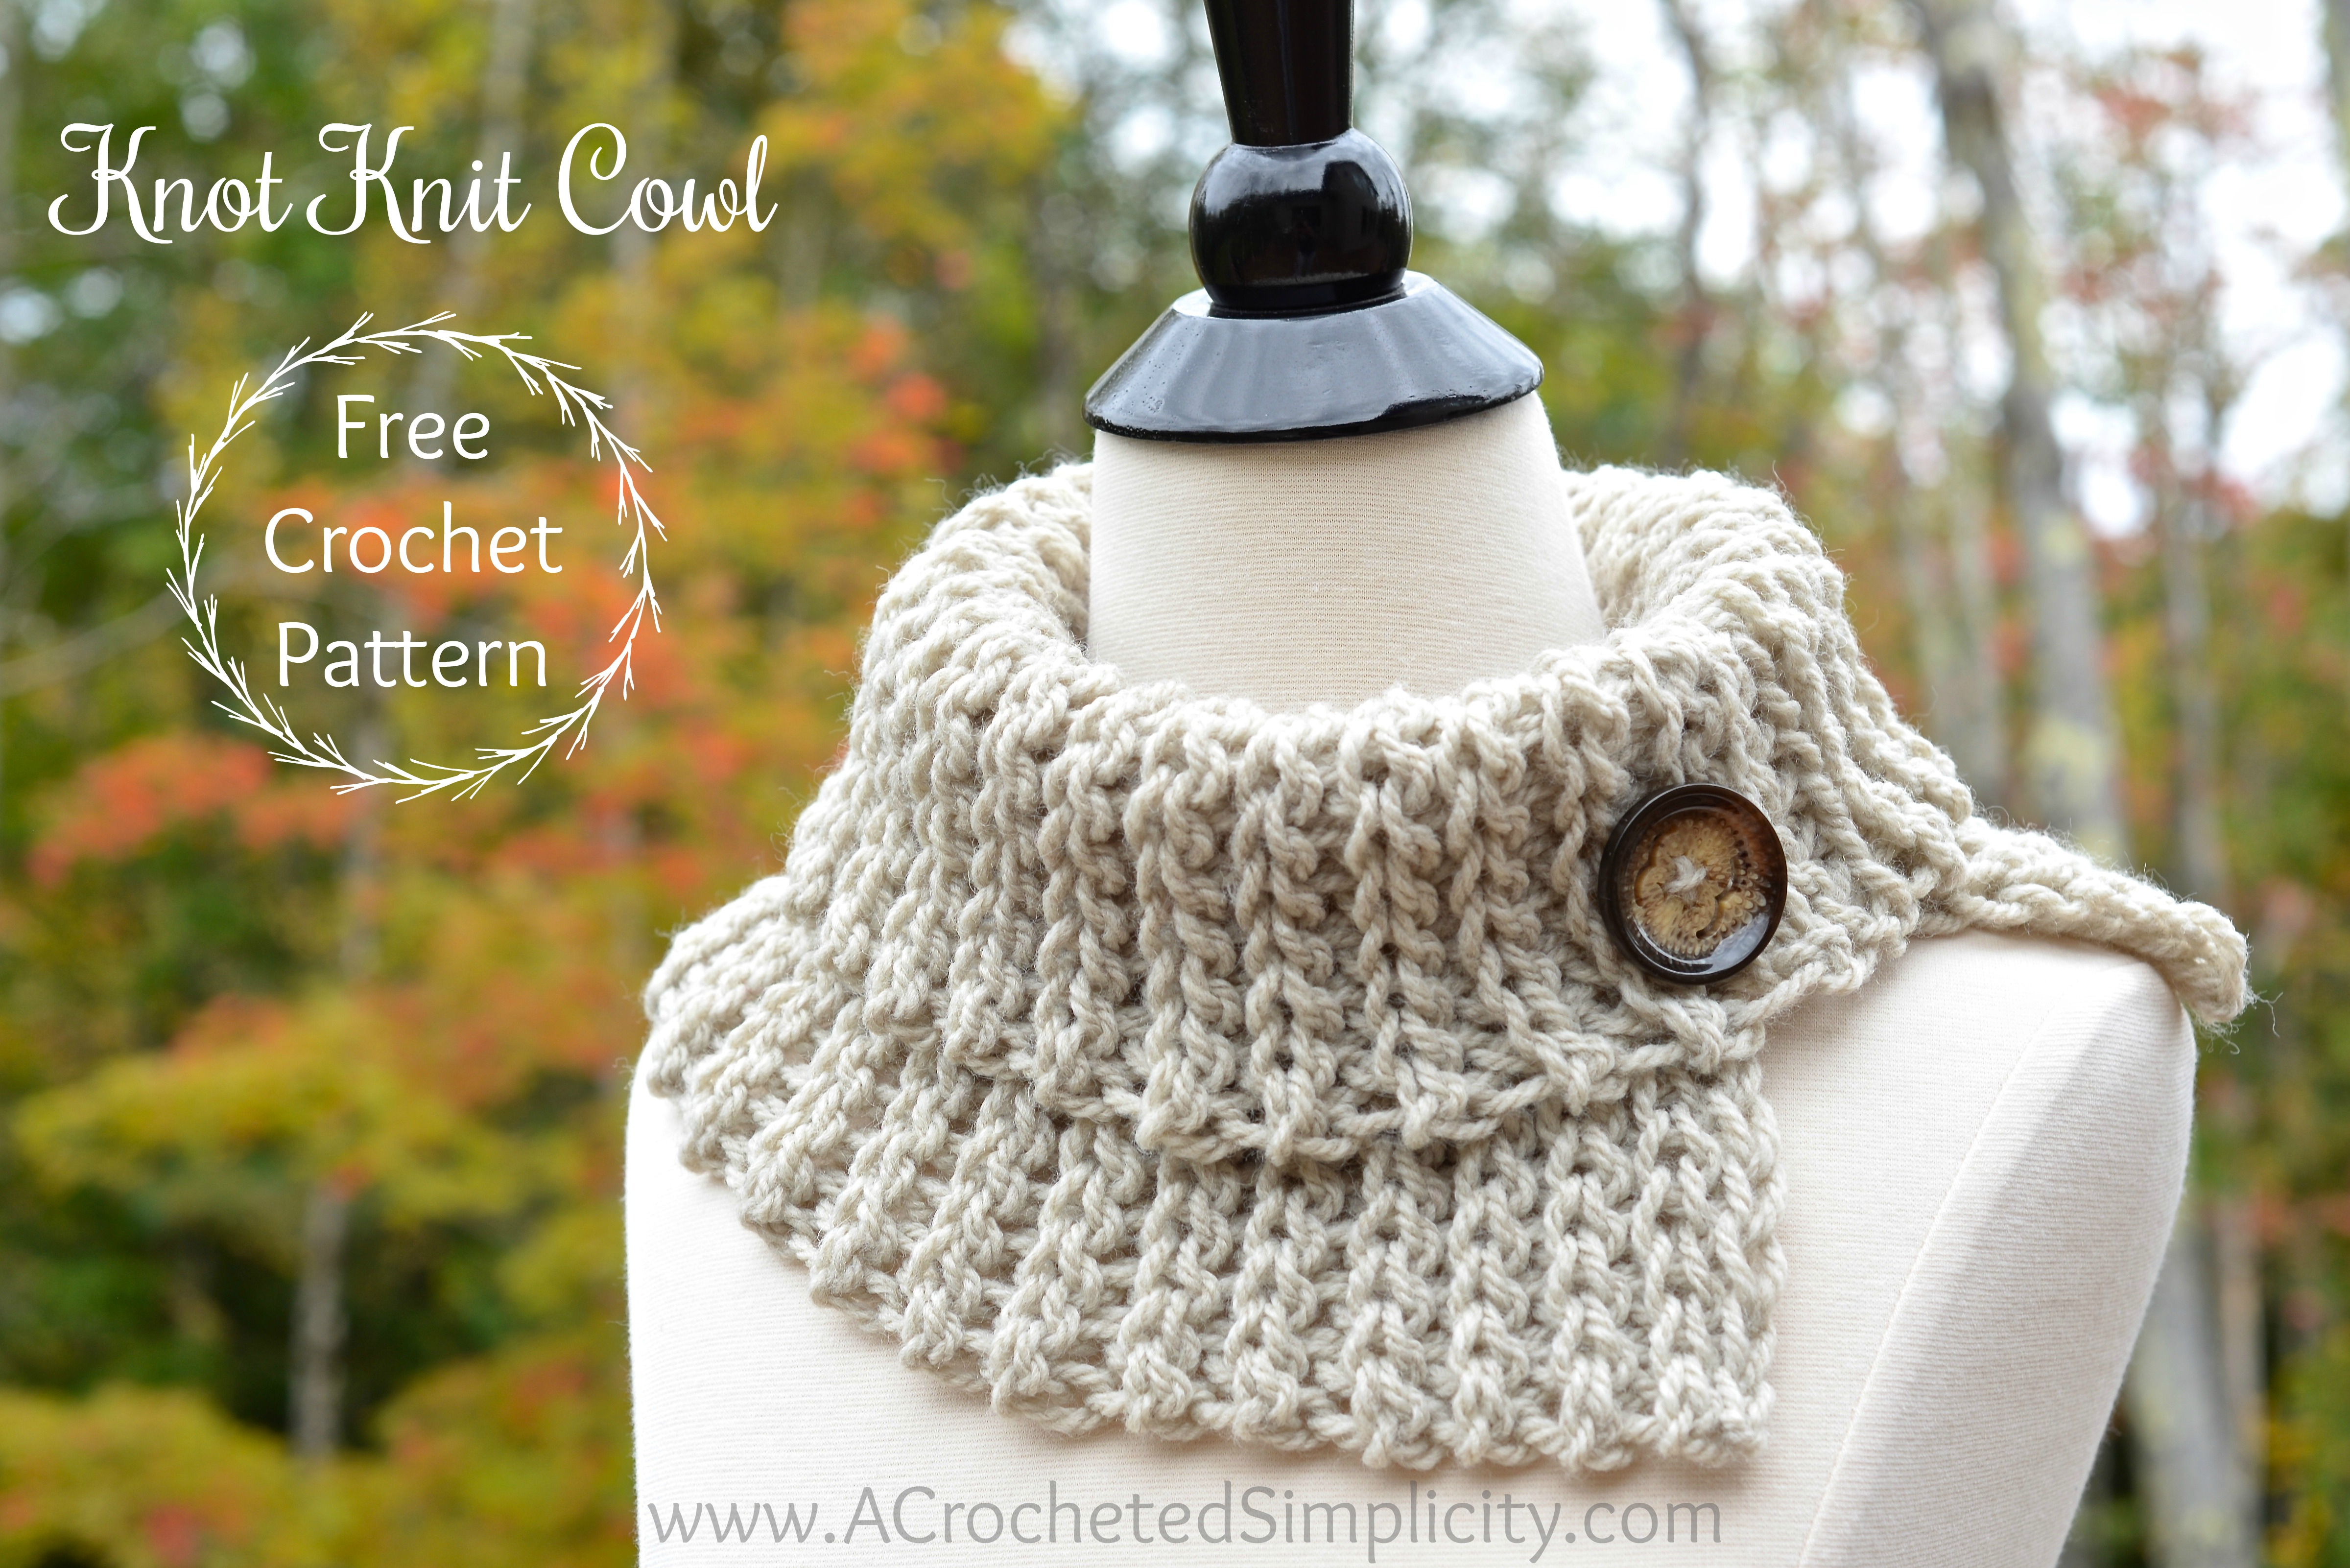 Cowl Knitted Scarf Patterns Free Crochet Pattern Knot Knit Cowl A Crocheted Simplicity